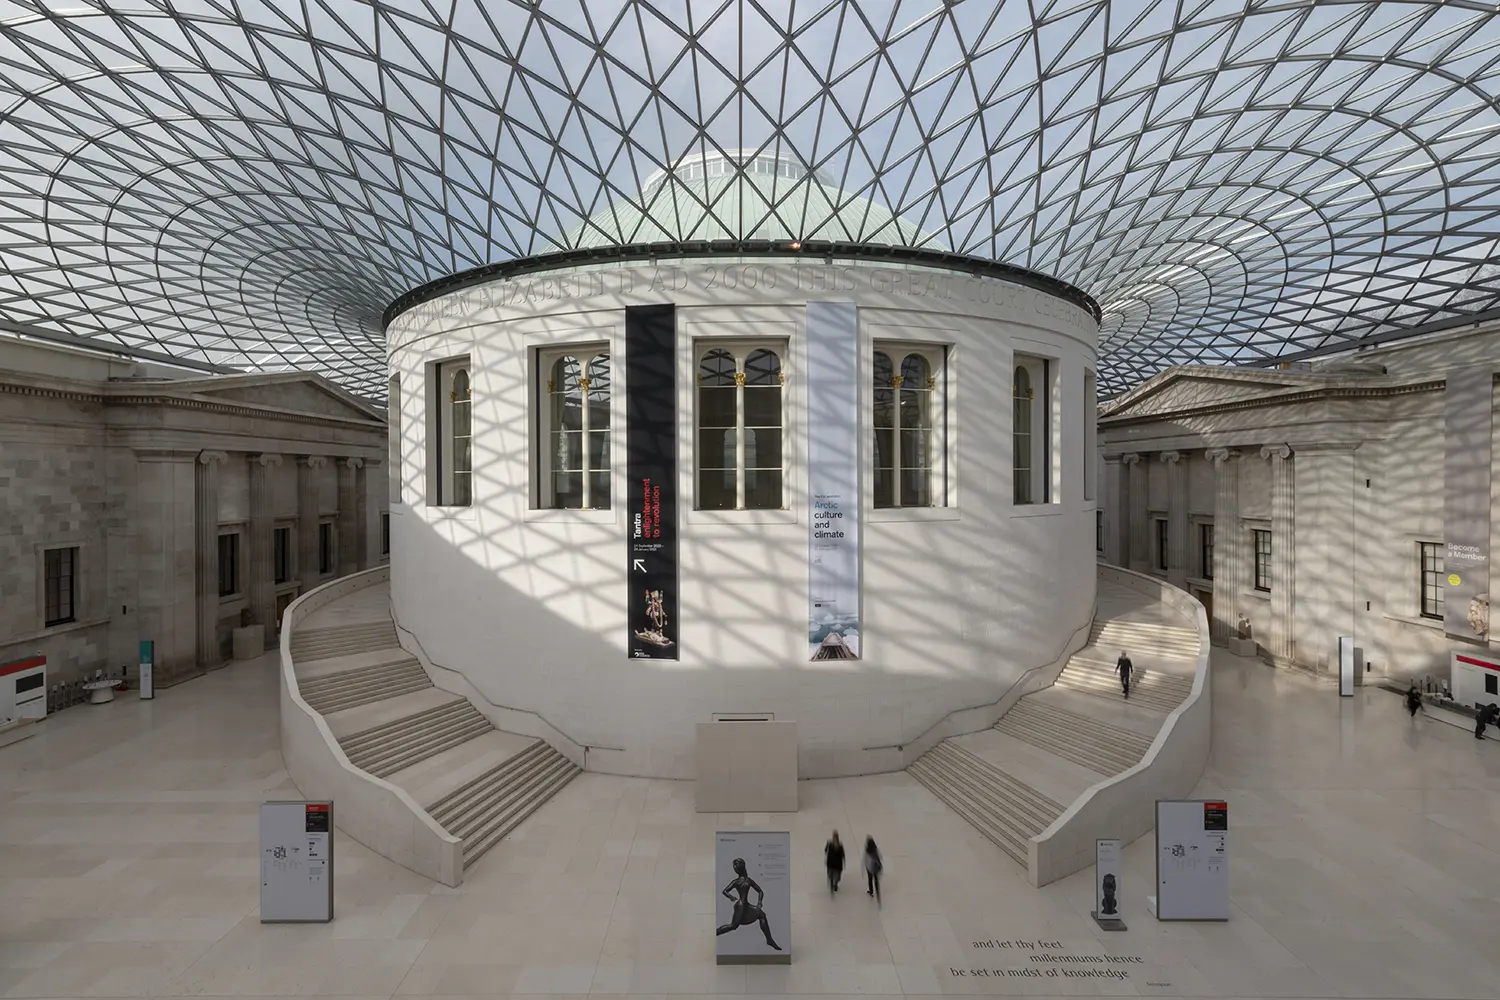 The great court in the British Museum in London, UK